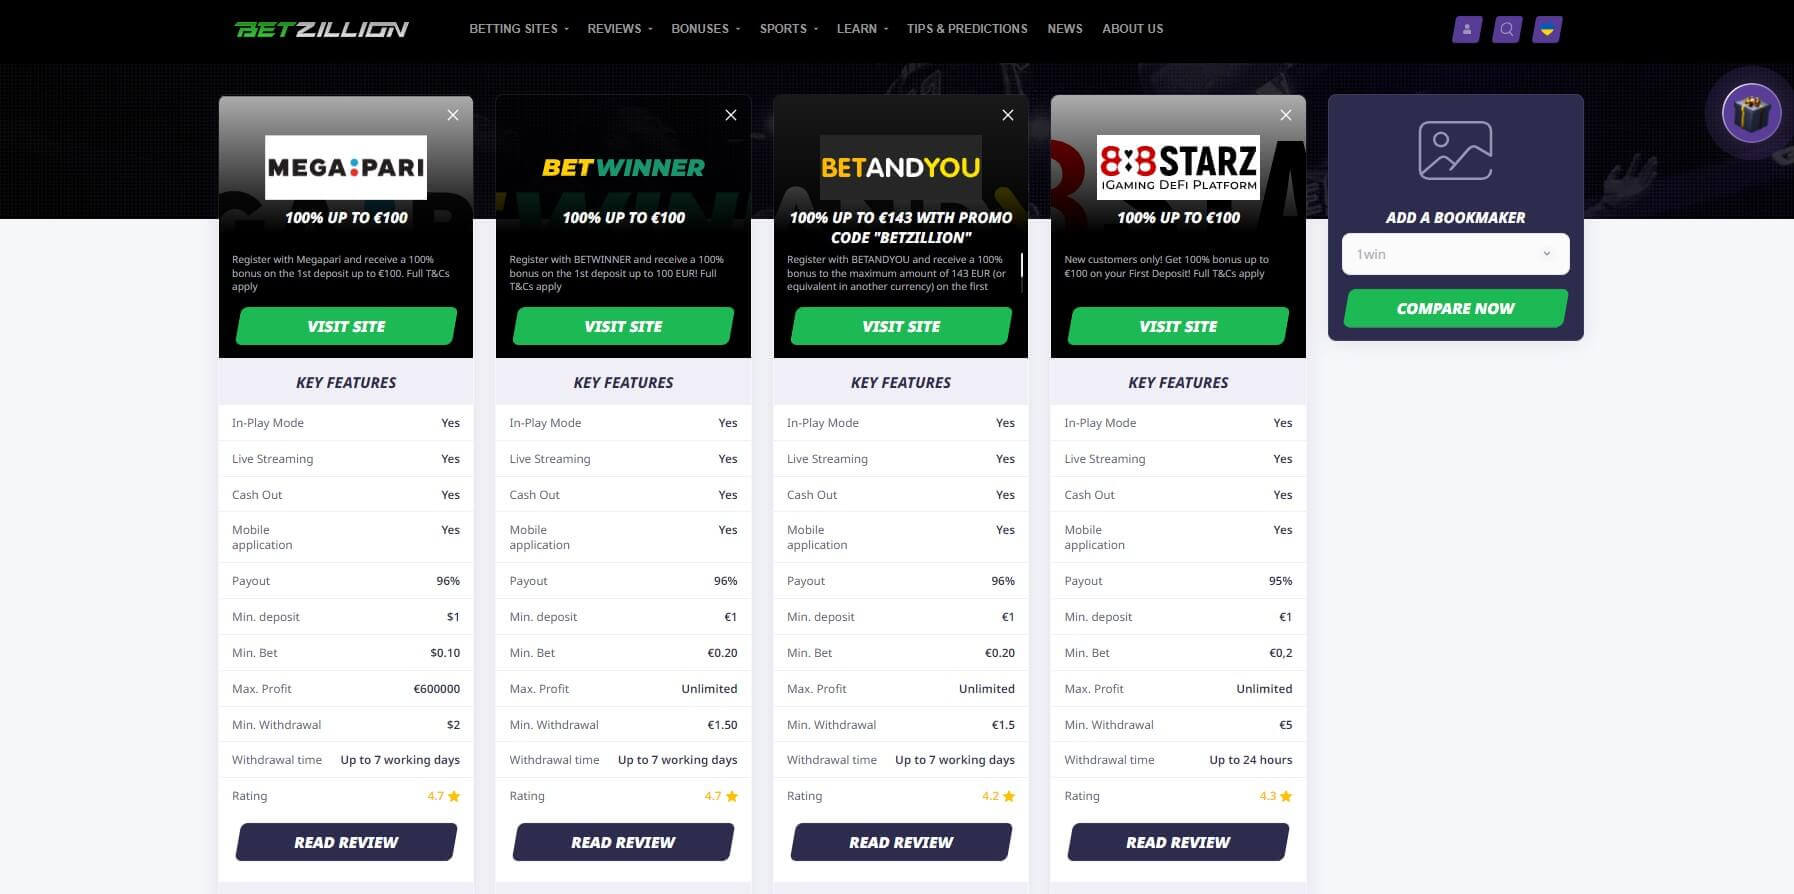 Sports Betting Sites Comparison Tool